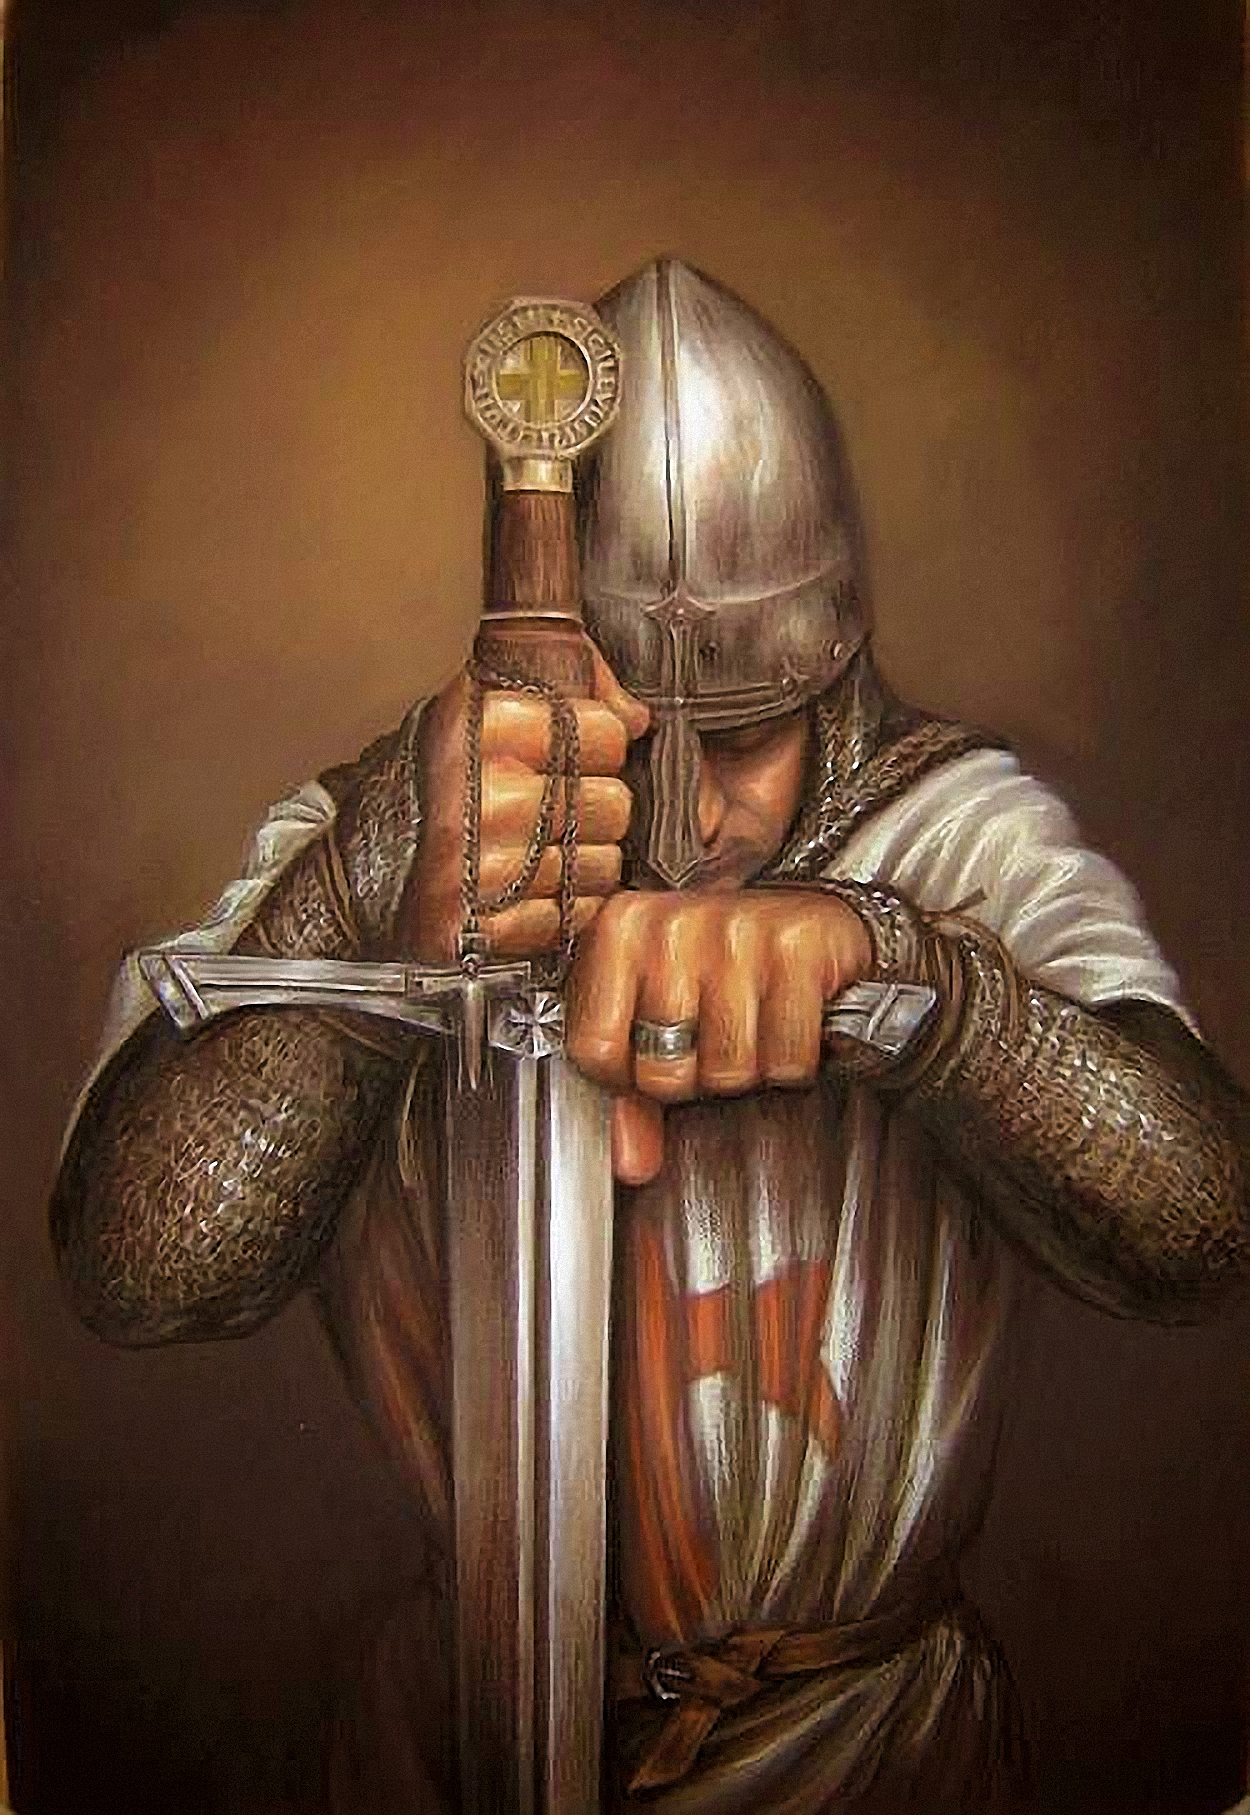 Knights Templar Order - Defenders of the Church.